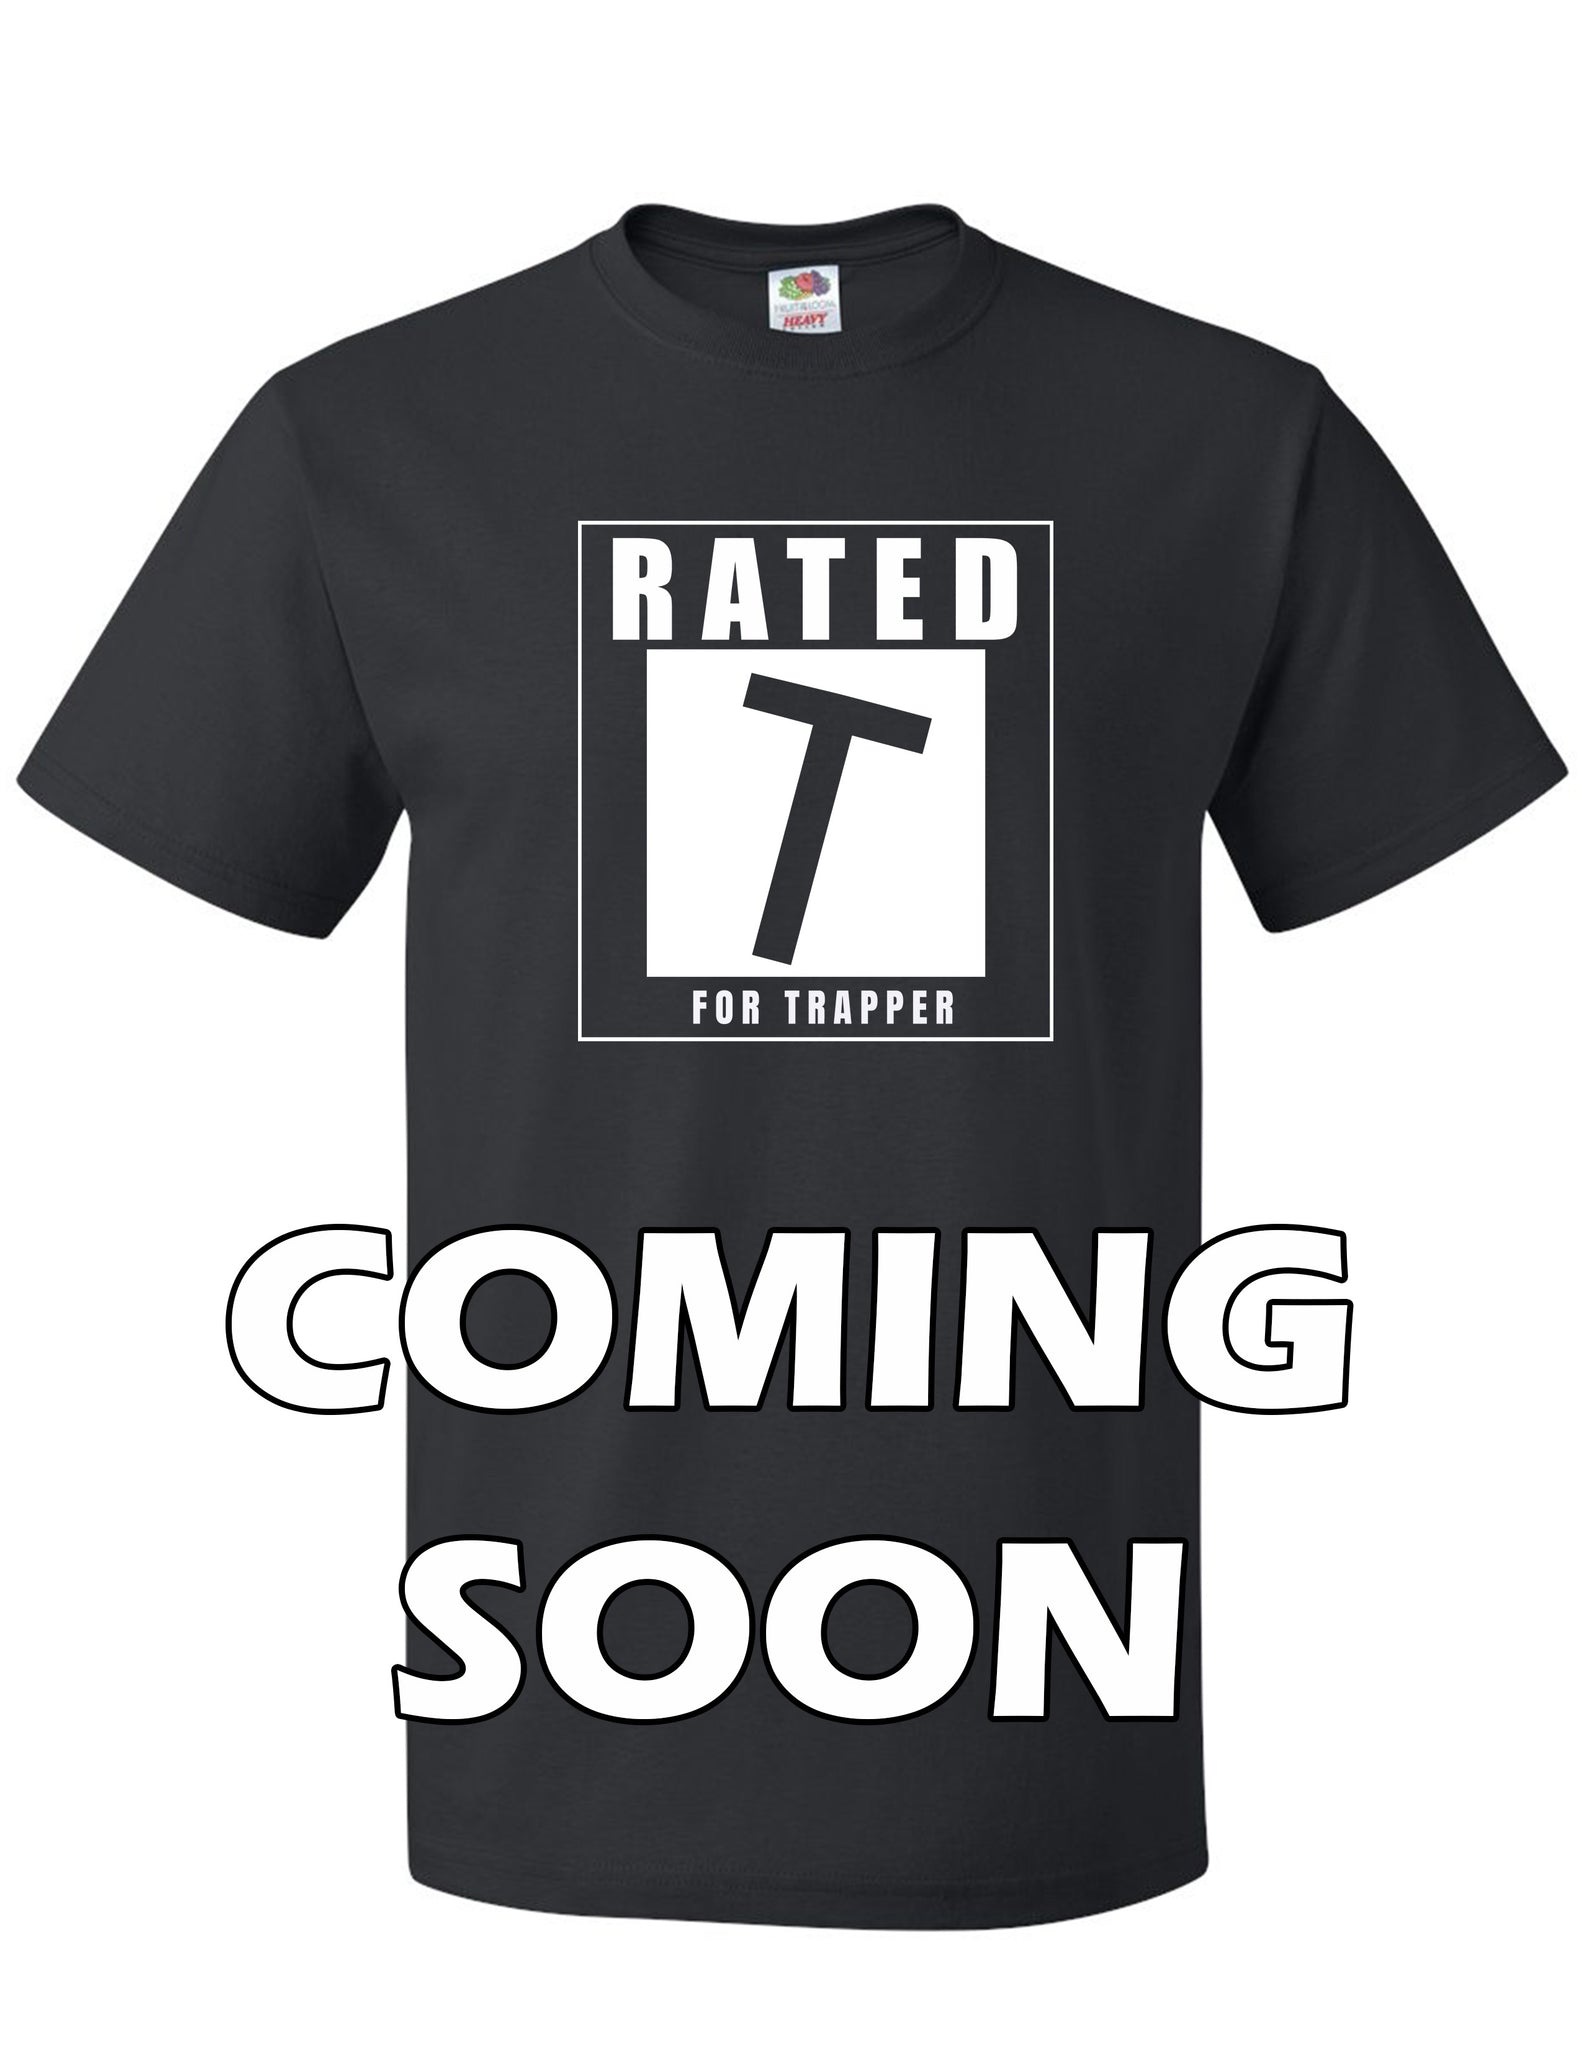 Rated T Tee